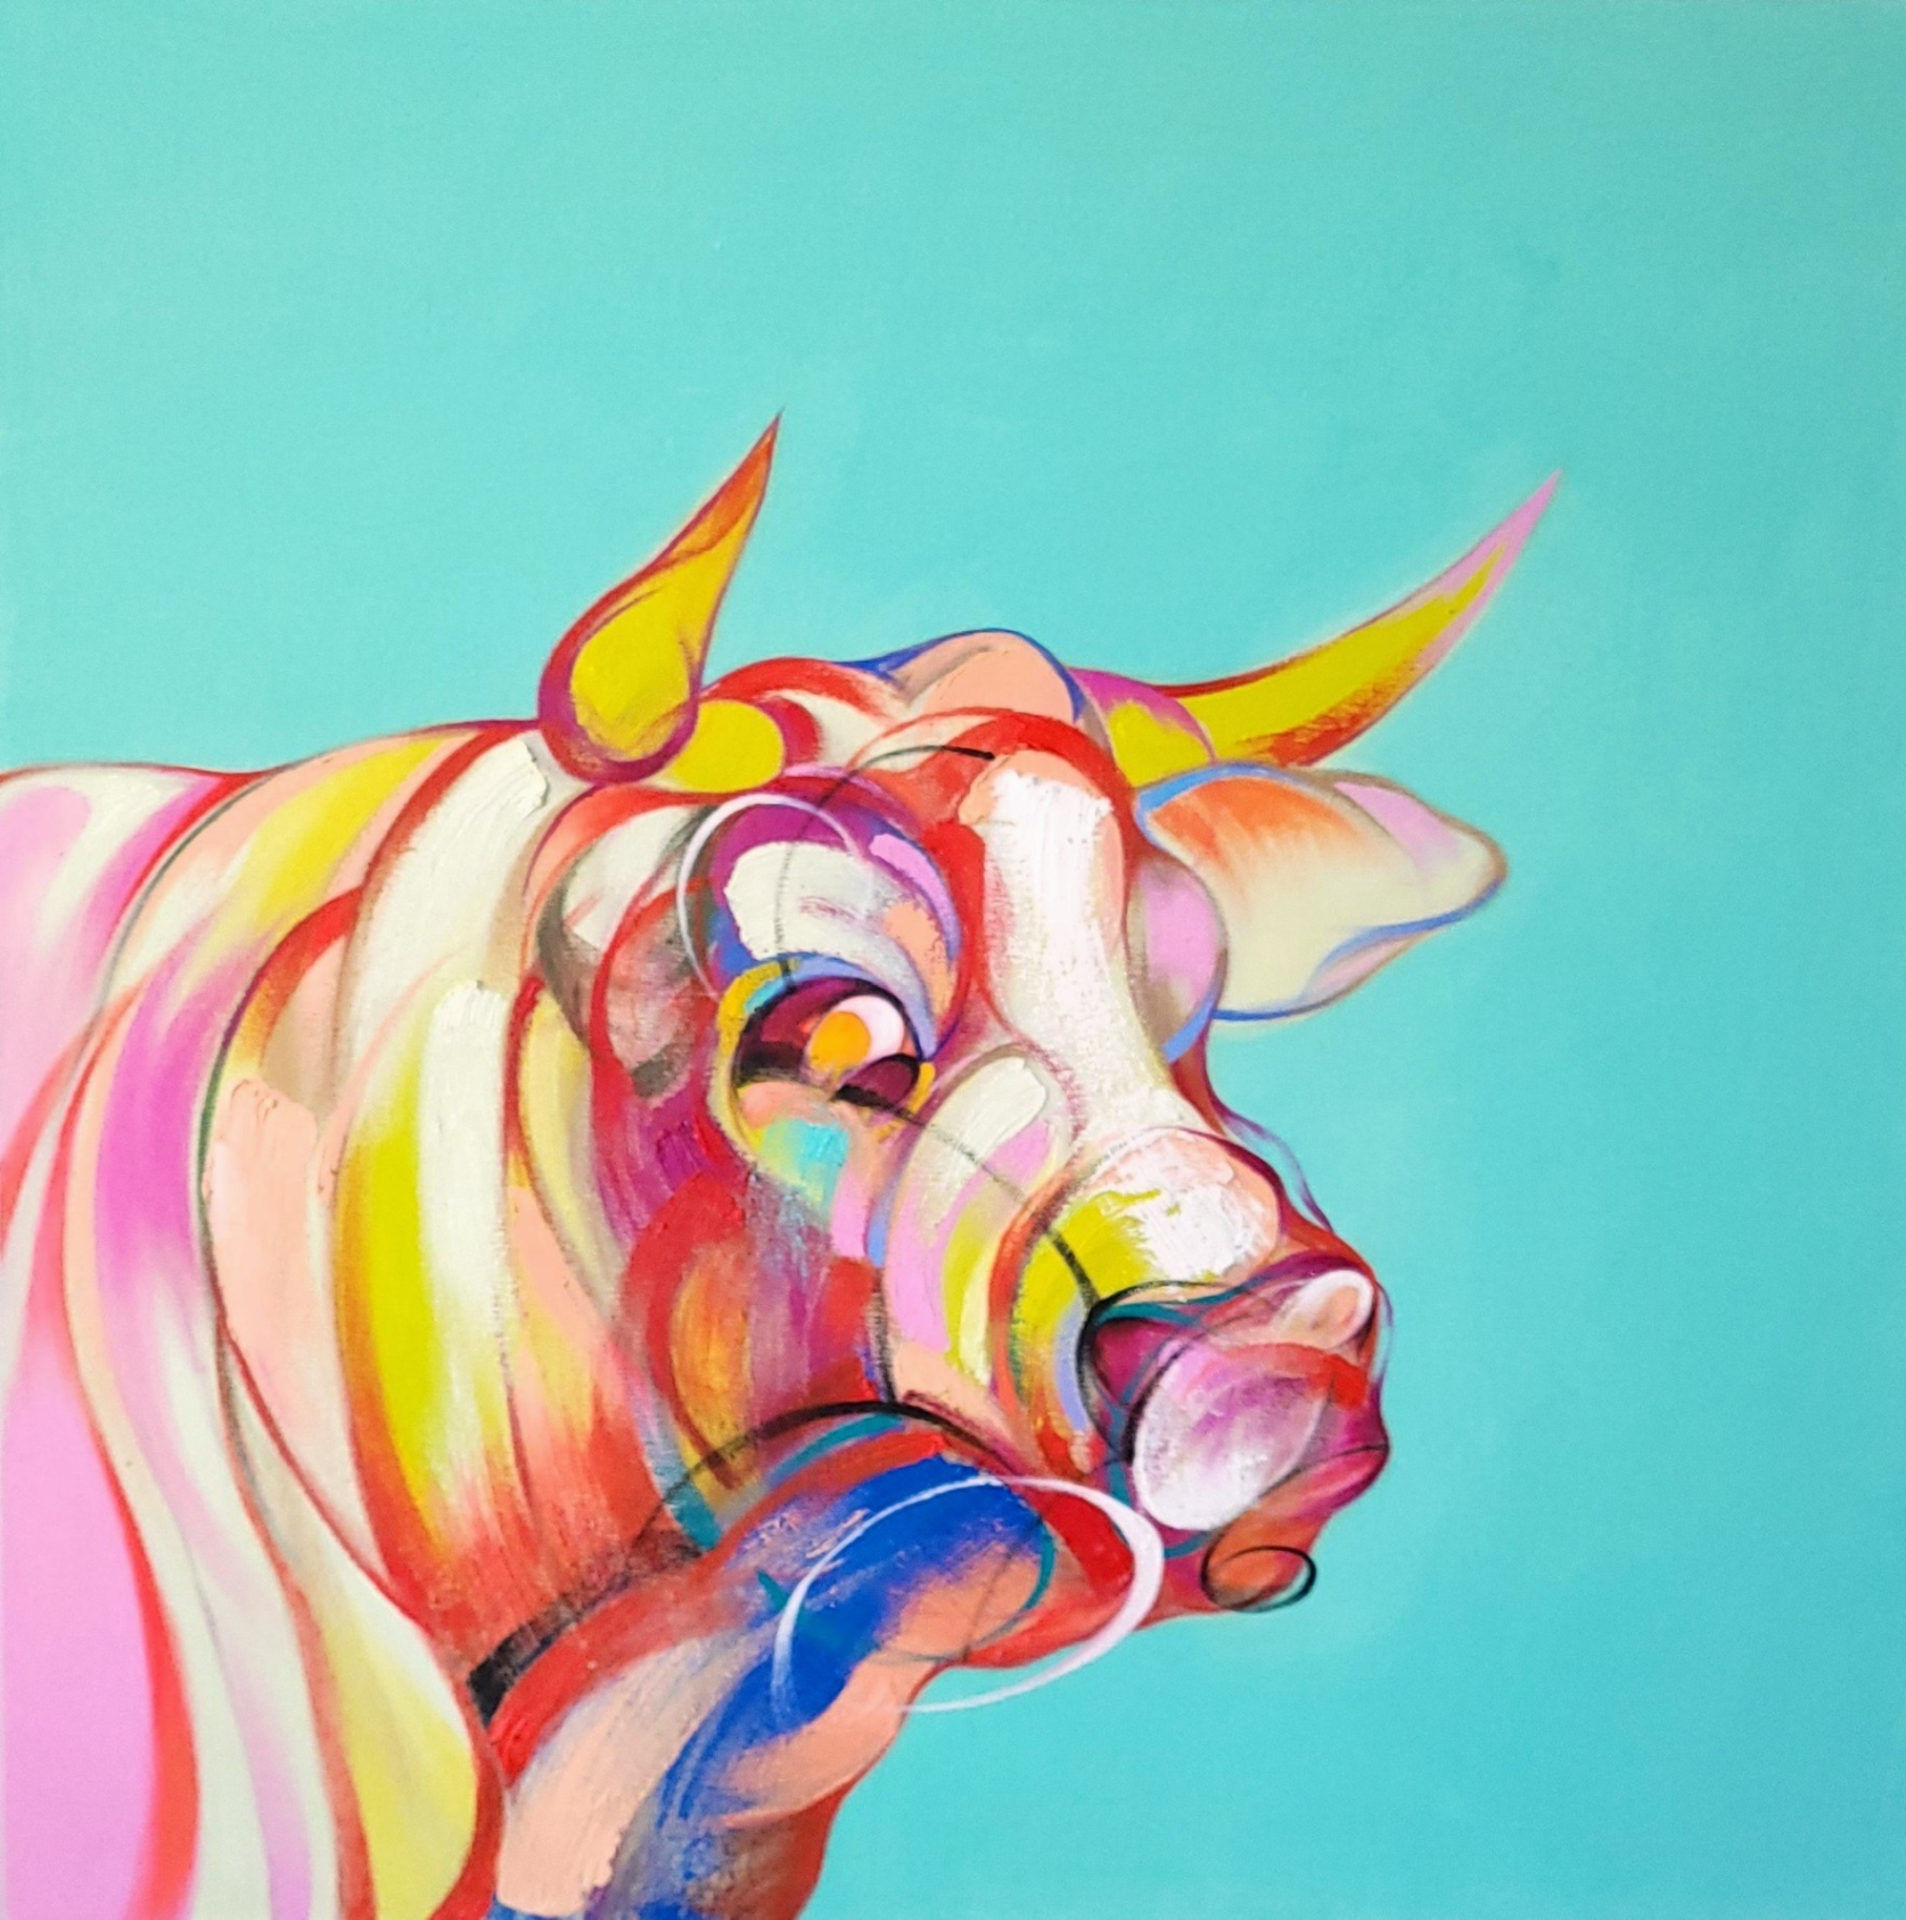 Artistic image of a colorful bull against a plain teal background. The bull is painted with broad strokes of pink, yellow, blue, white, and red.